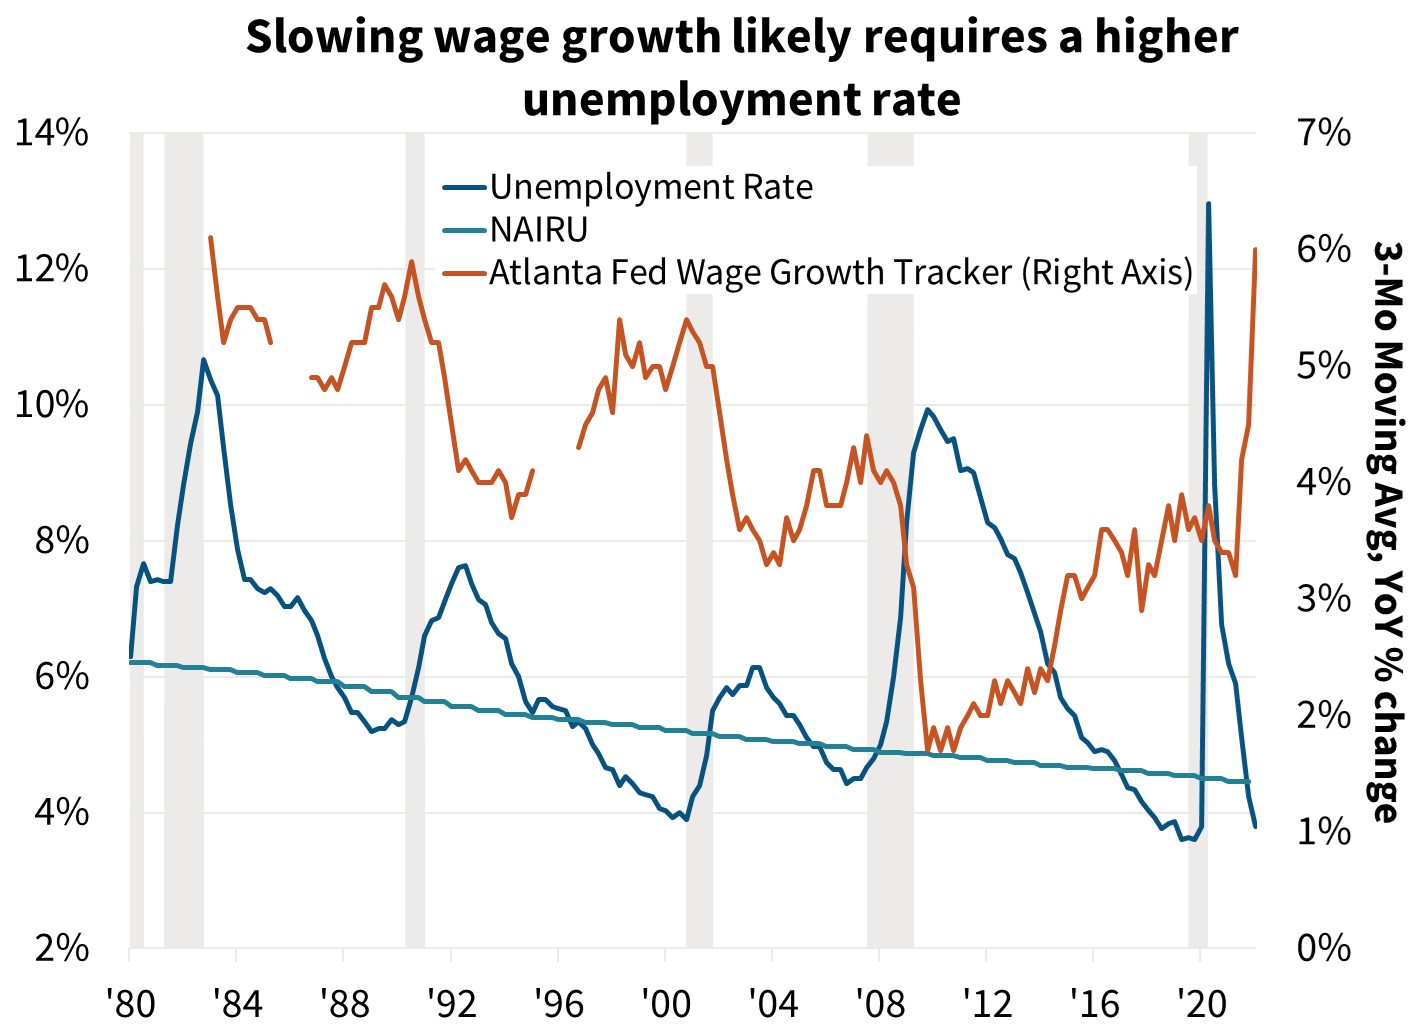  Slowing wage growth likely requires a higher unemployment rate